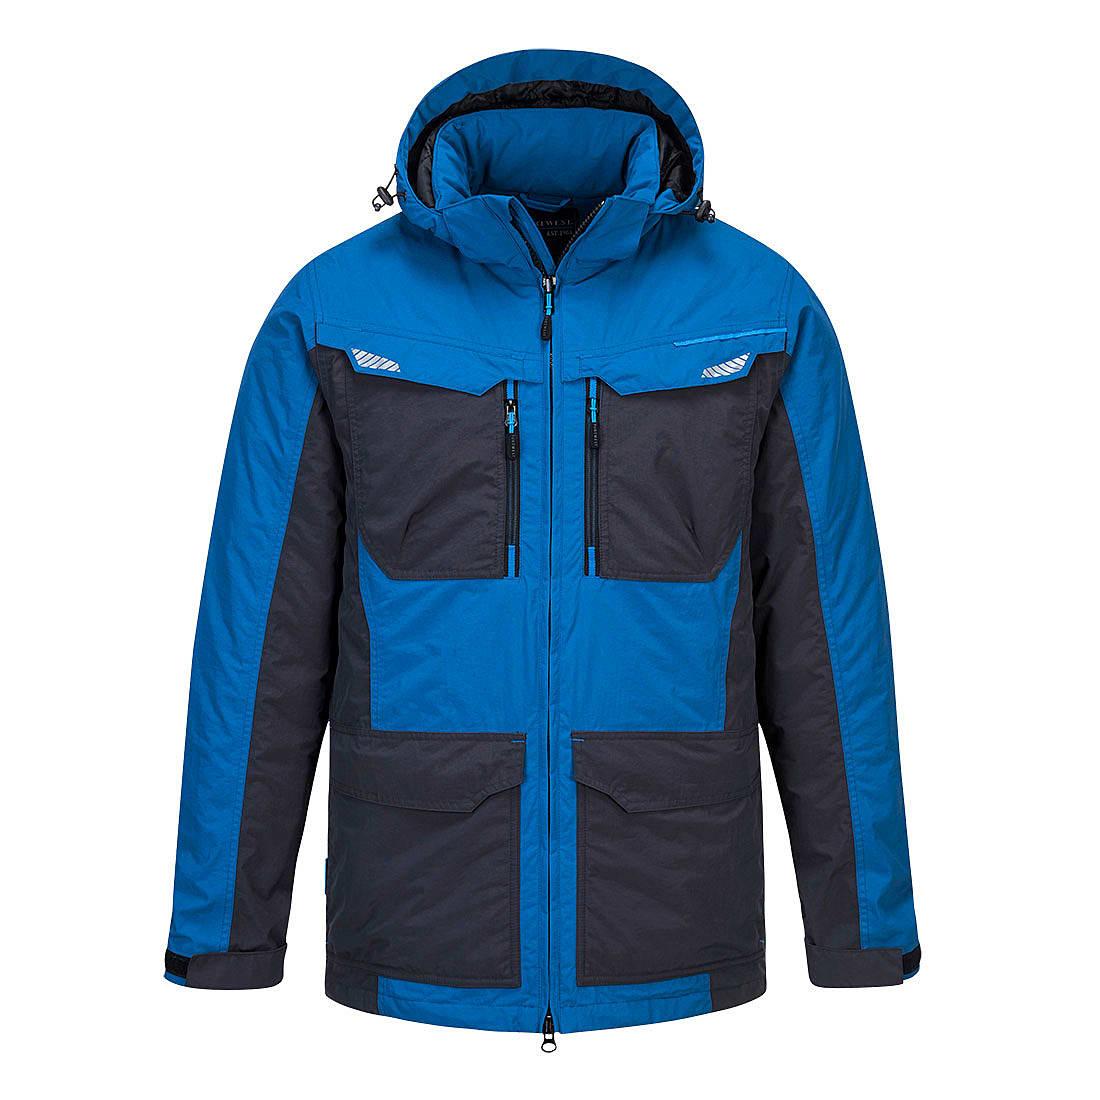 Portwest WX3 Winter Jacket in Persian (Product Code: T740)